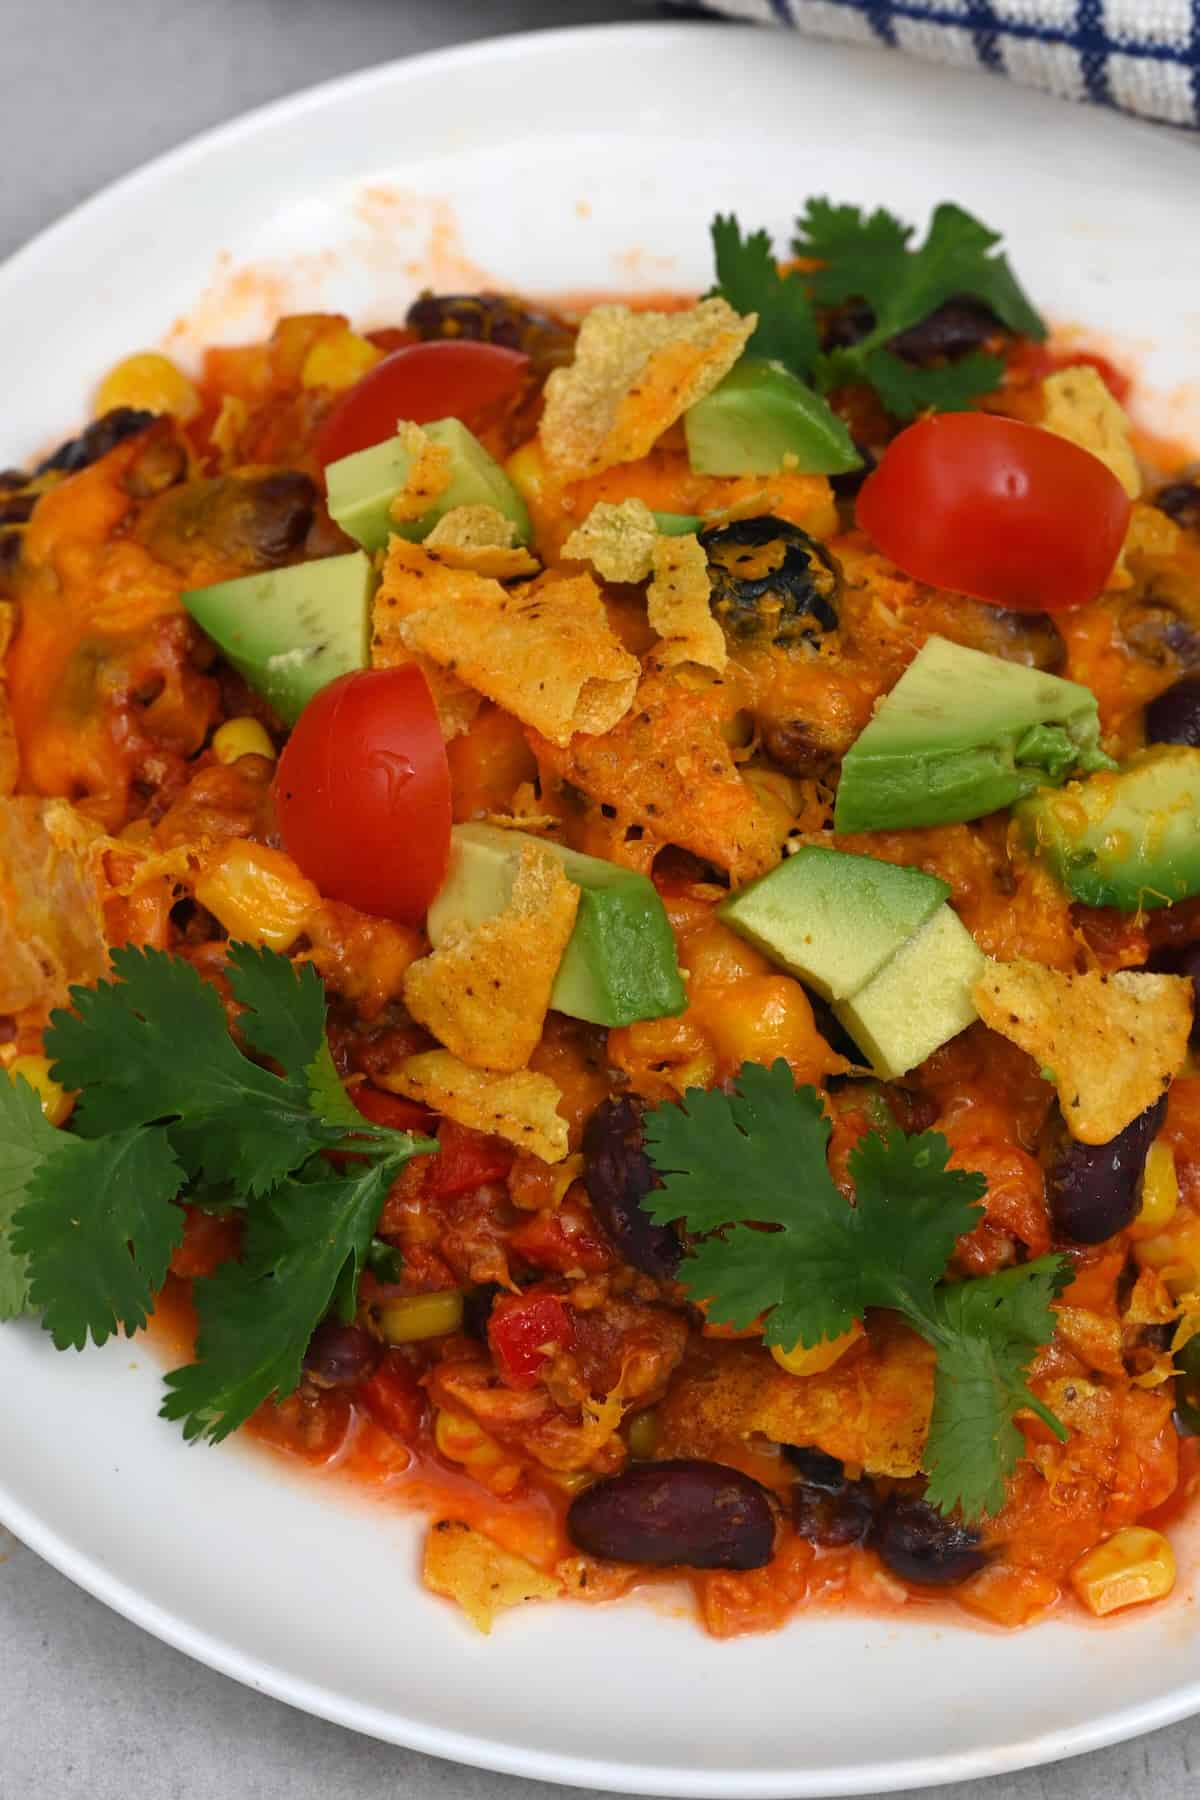 A serving of taco casserole topped with avocado, tomatoes, and cilantro